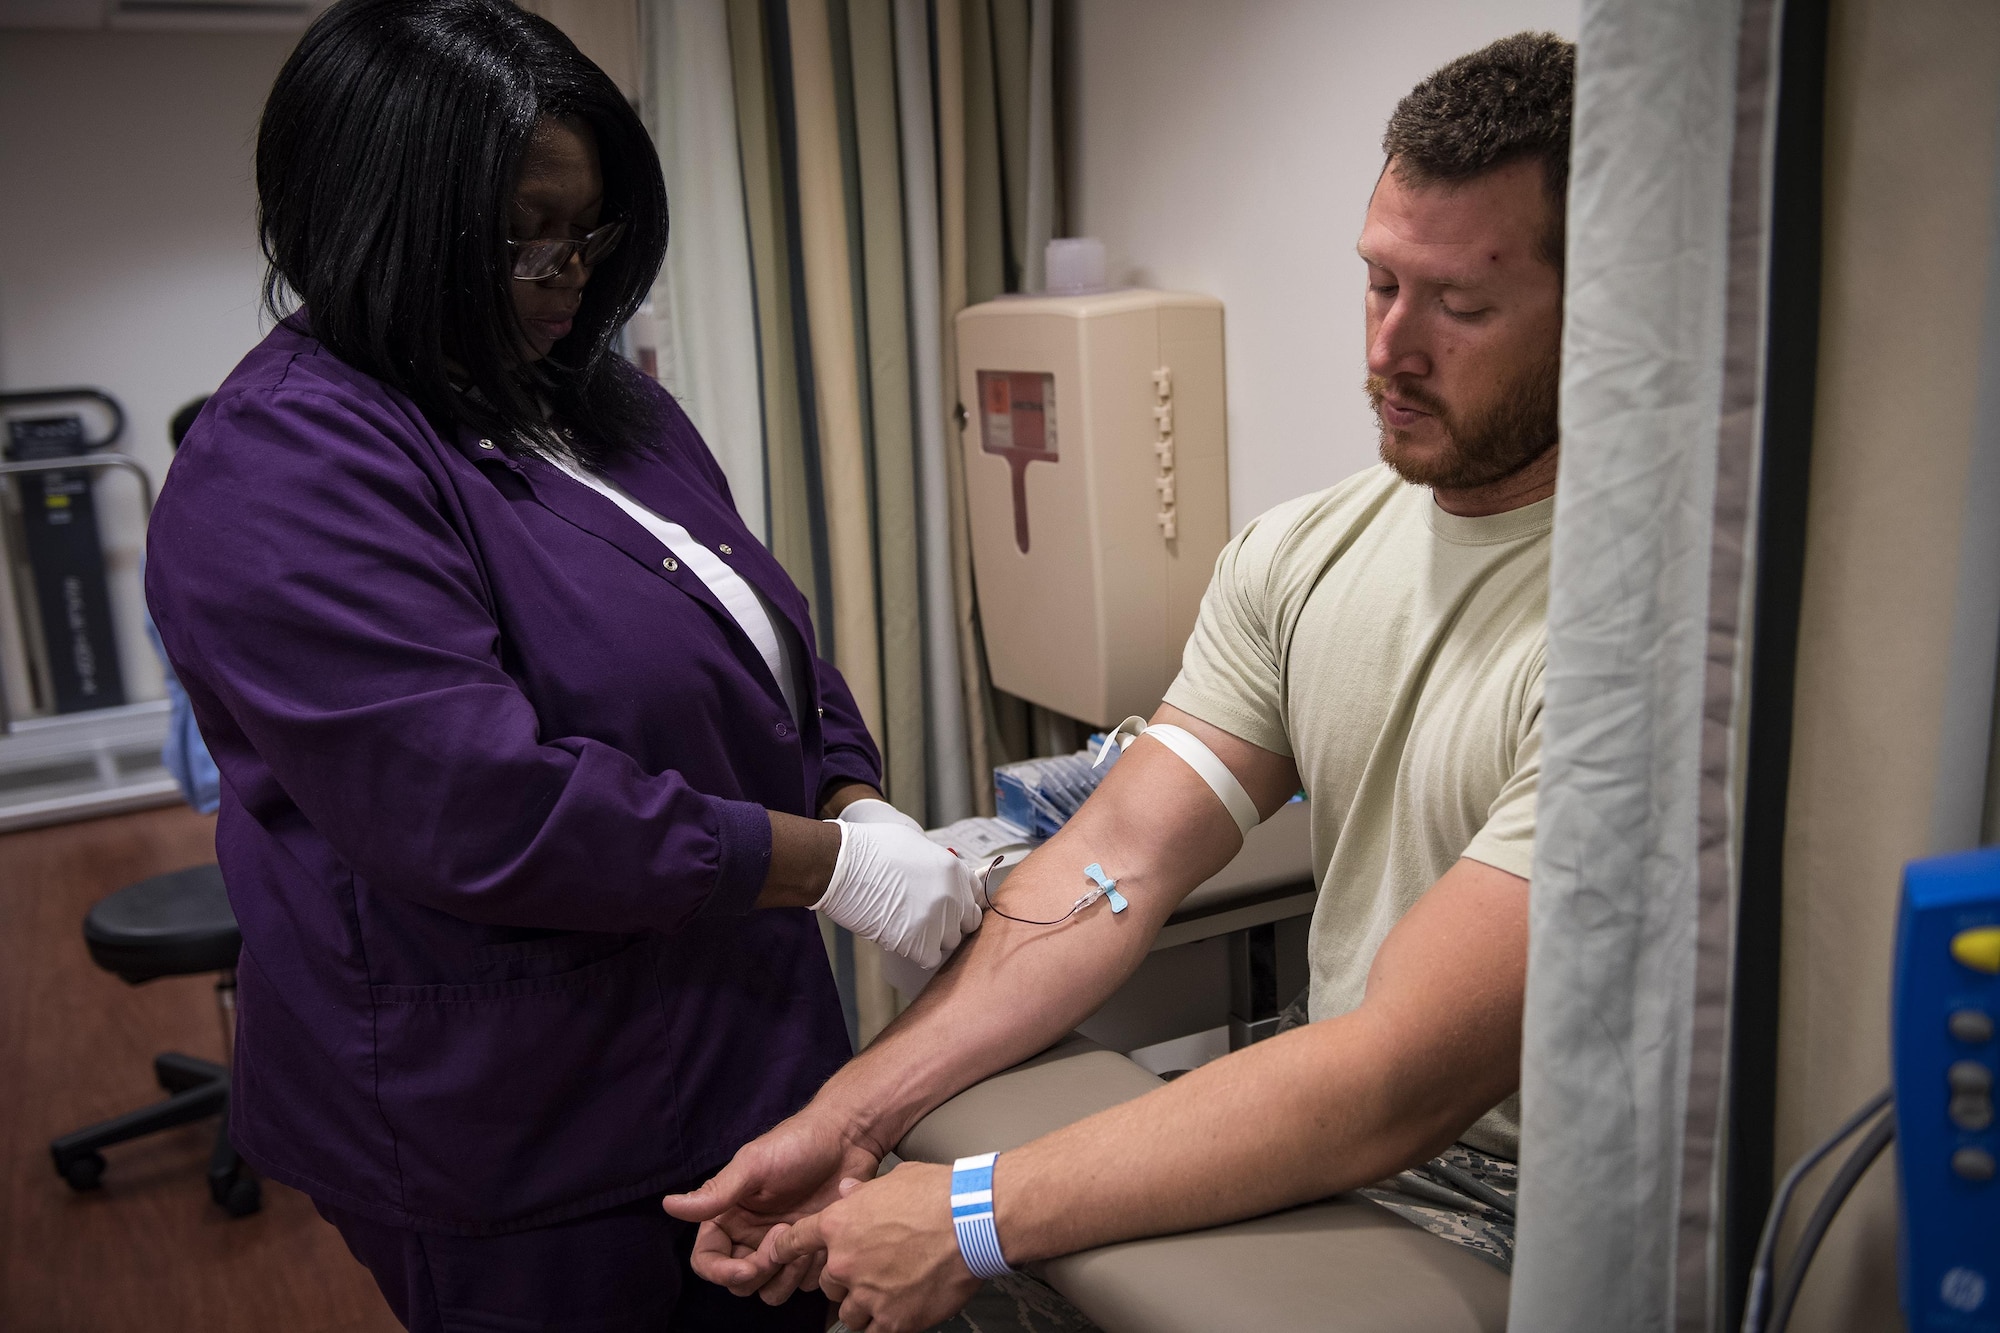 A medical assistant draws blood from Staff Sgt. Nicholas Worley, 23d Civil Engineer Squadron electrical systems craftsman, during an appointment, April 18, 2017, in Valdosta, Ga. In January 2012 Worley was diagnosed with Chronic Myelogenous Leukemia, an uncommon form of blood-cell cancer that starts in the blood-forming bone marrow cells. He’s currently in remission and goes to the cancer center every three months to ensure his treatment is still working. (U.S. Air Force Photo by Senior Airman Janiqua P. Robinson)